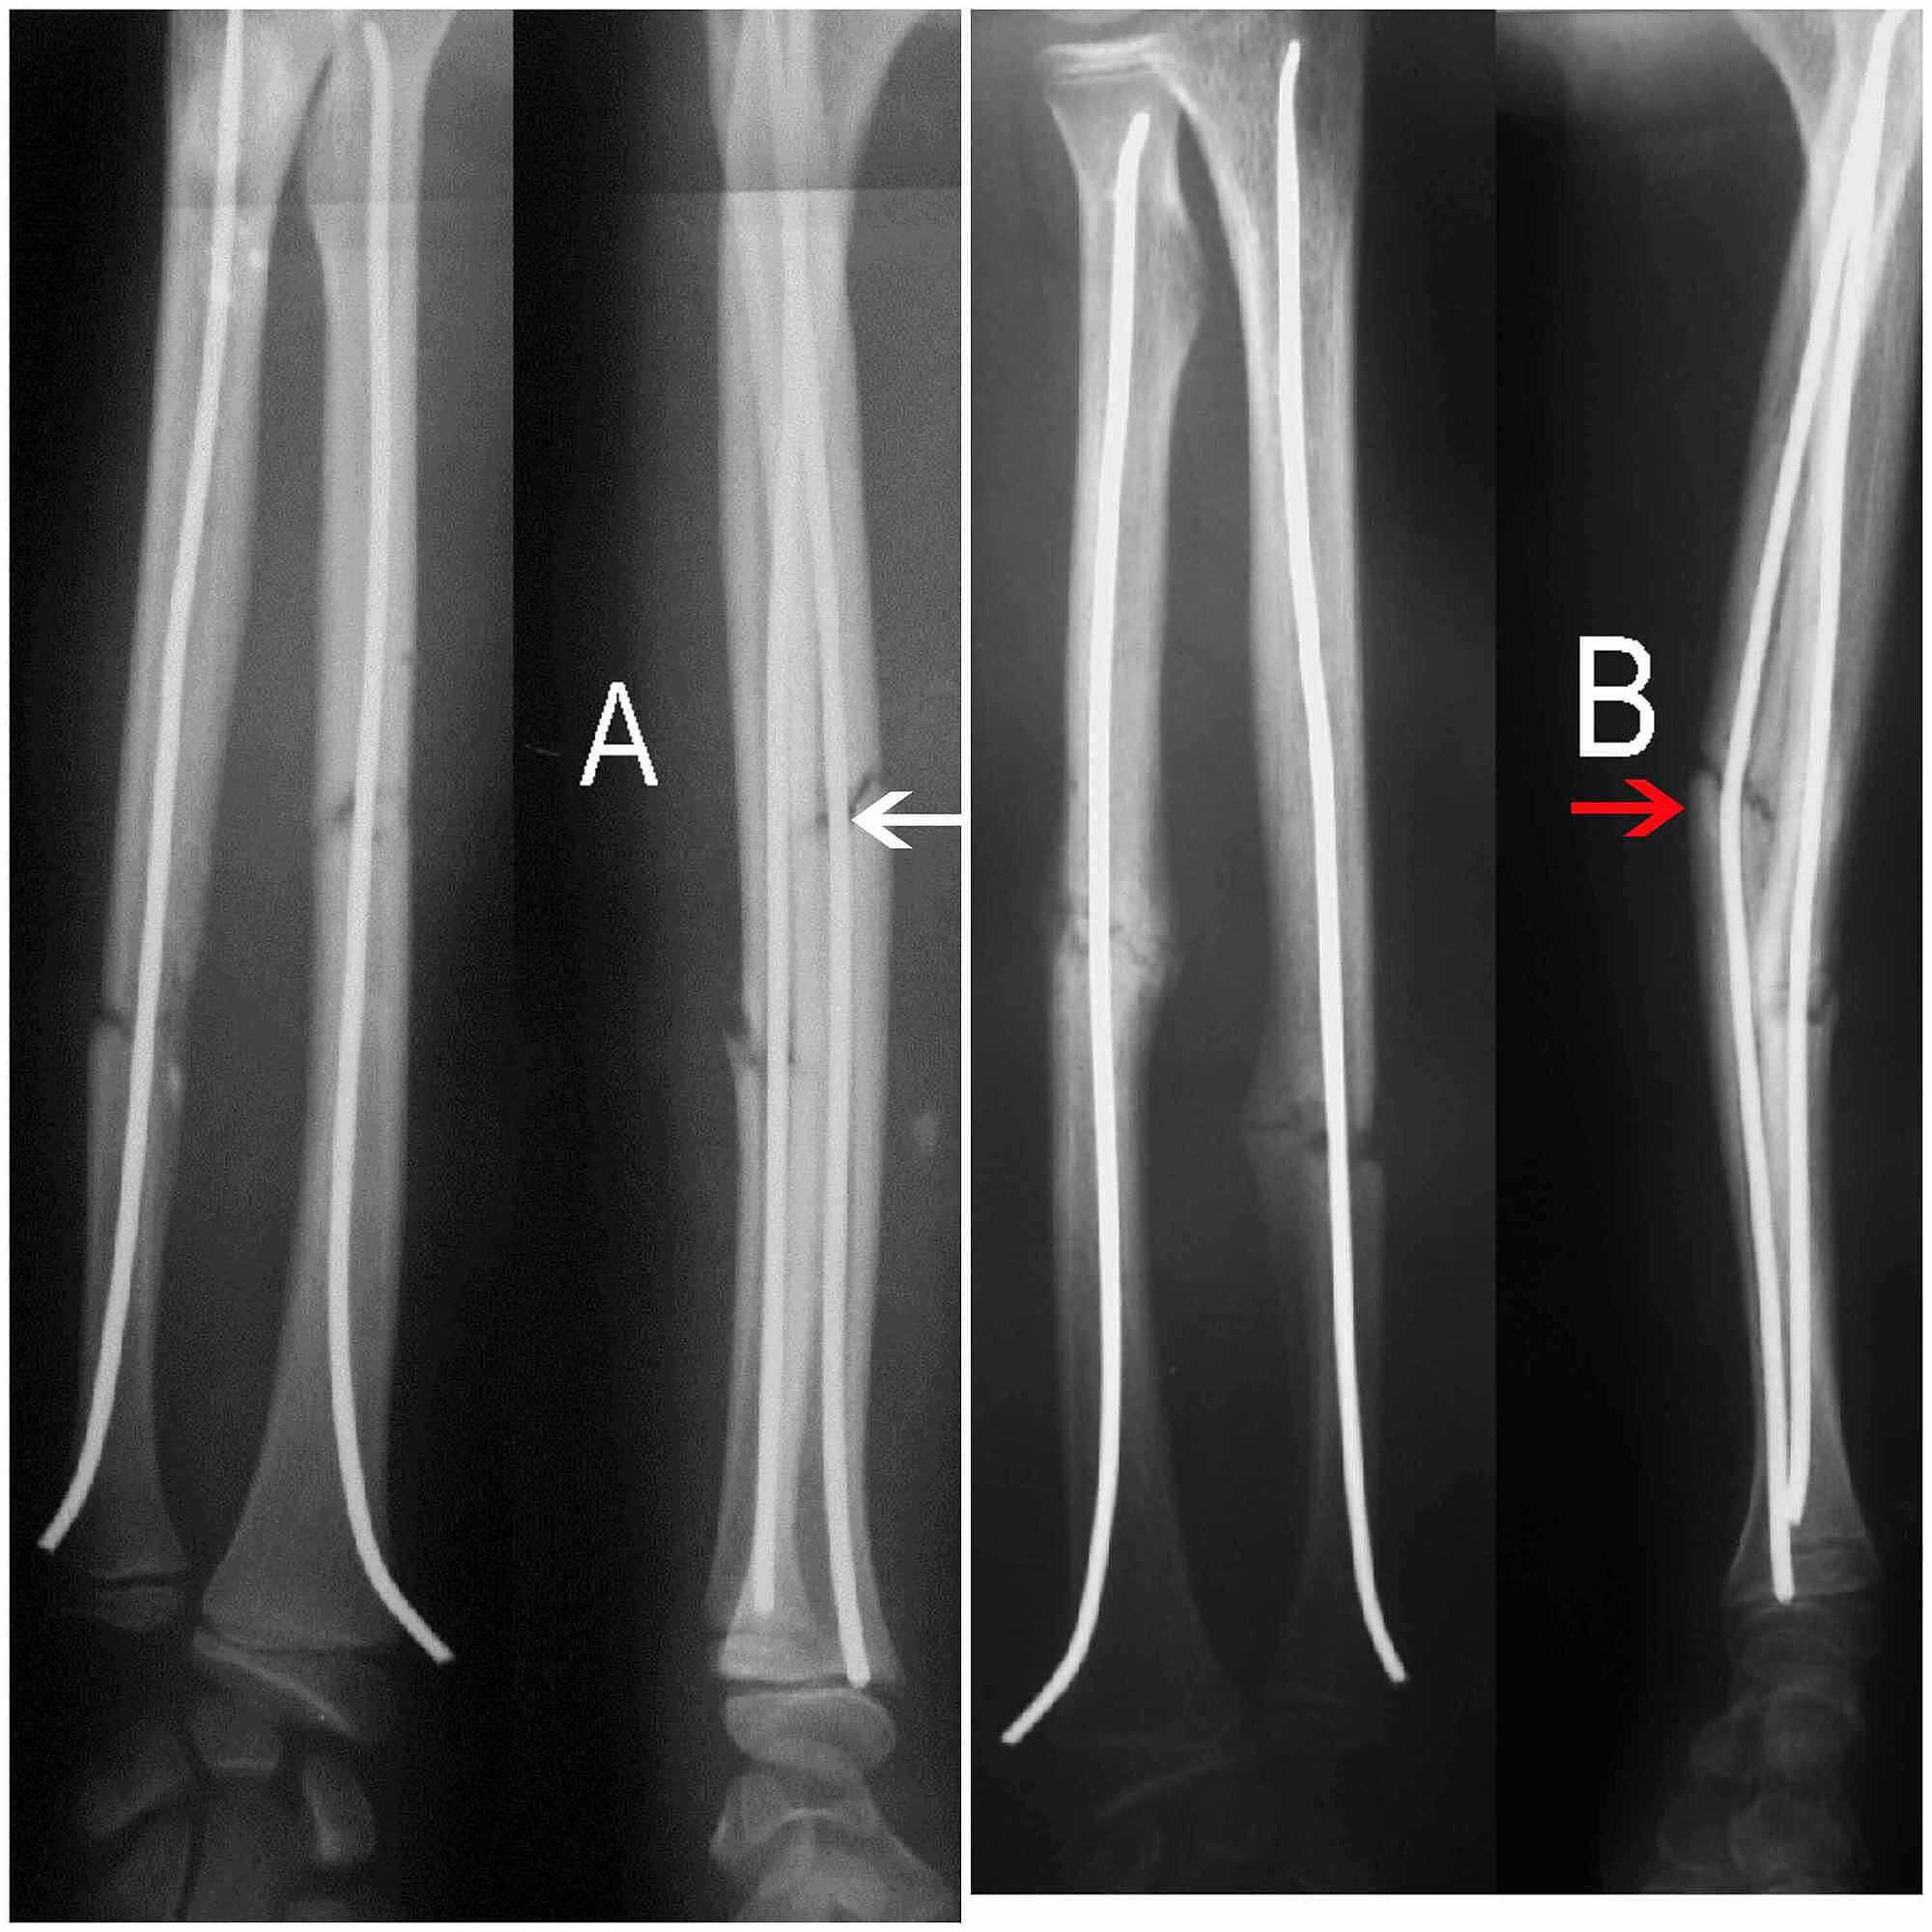 Pdf Retrograde Fixation Of The Ulna In Pediatric Forearm Fractures ...